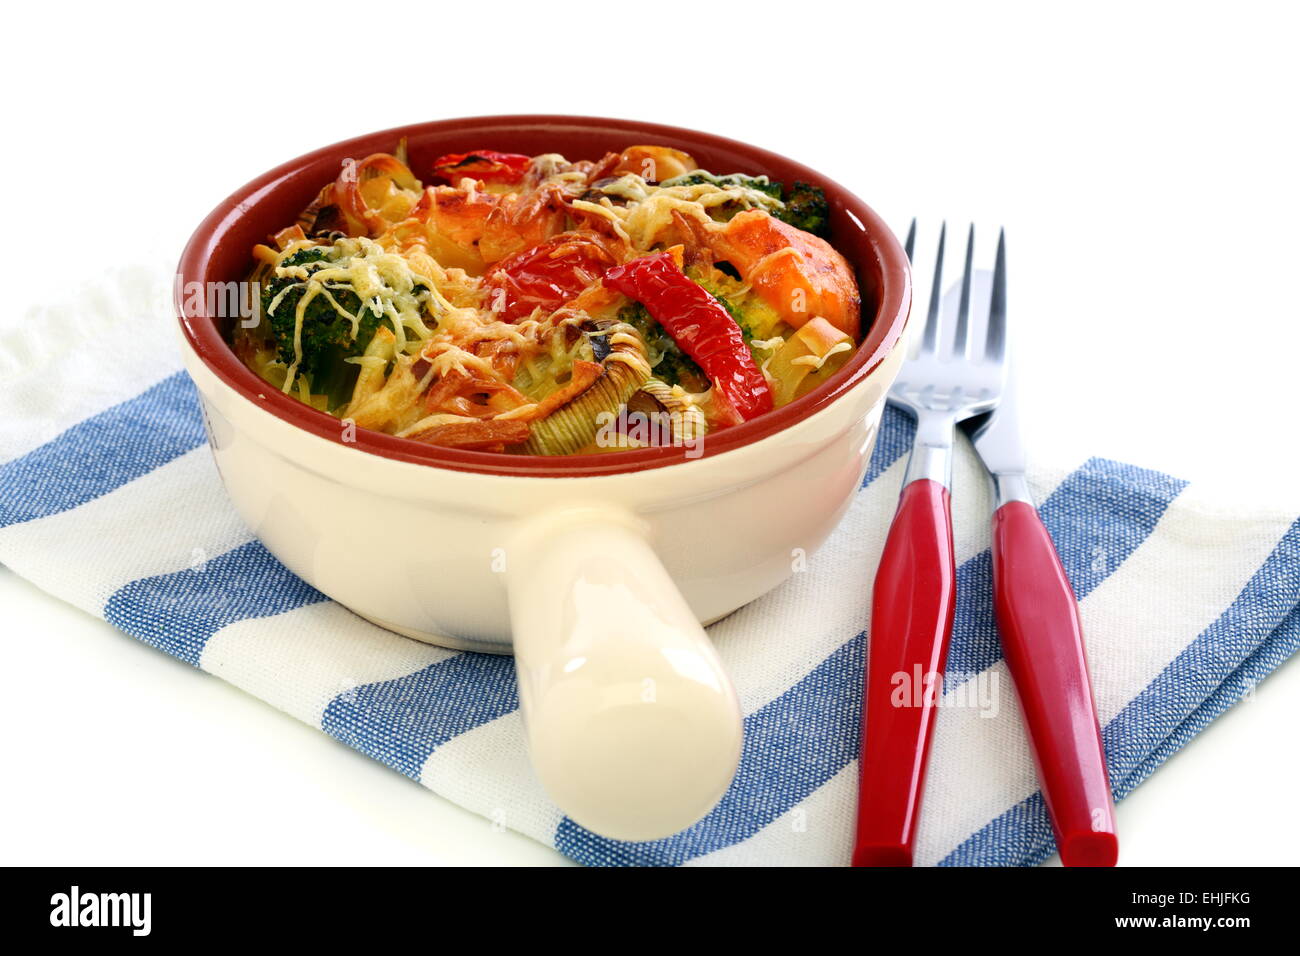 Casserole of pasta, vegetables and cheese. Stock Photo